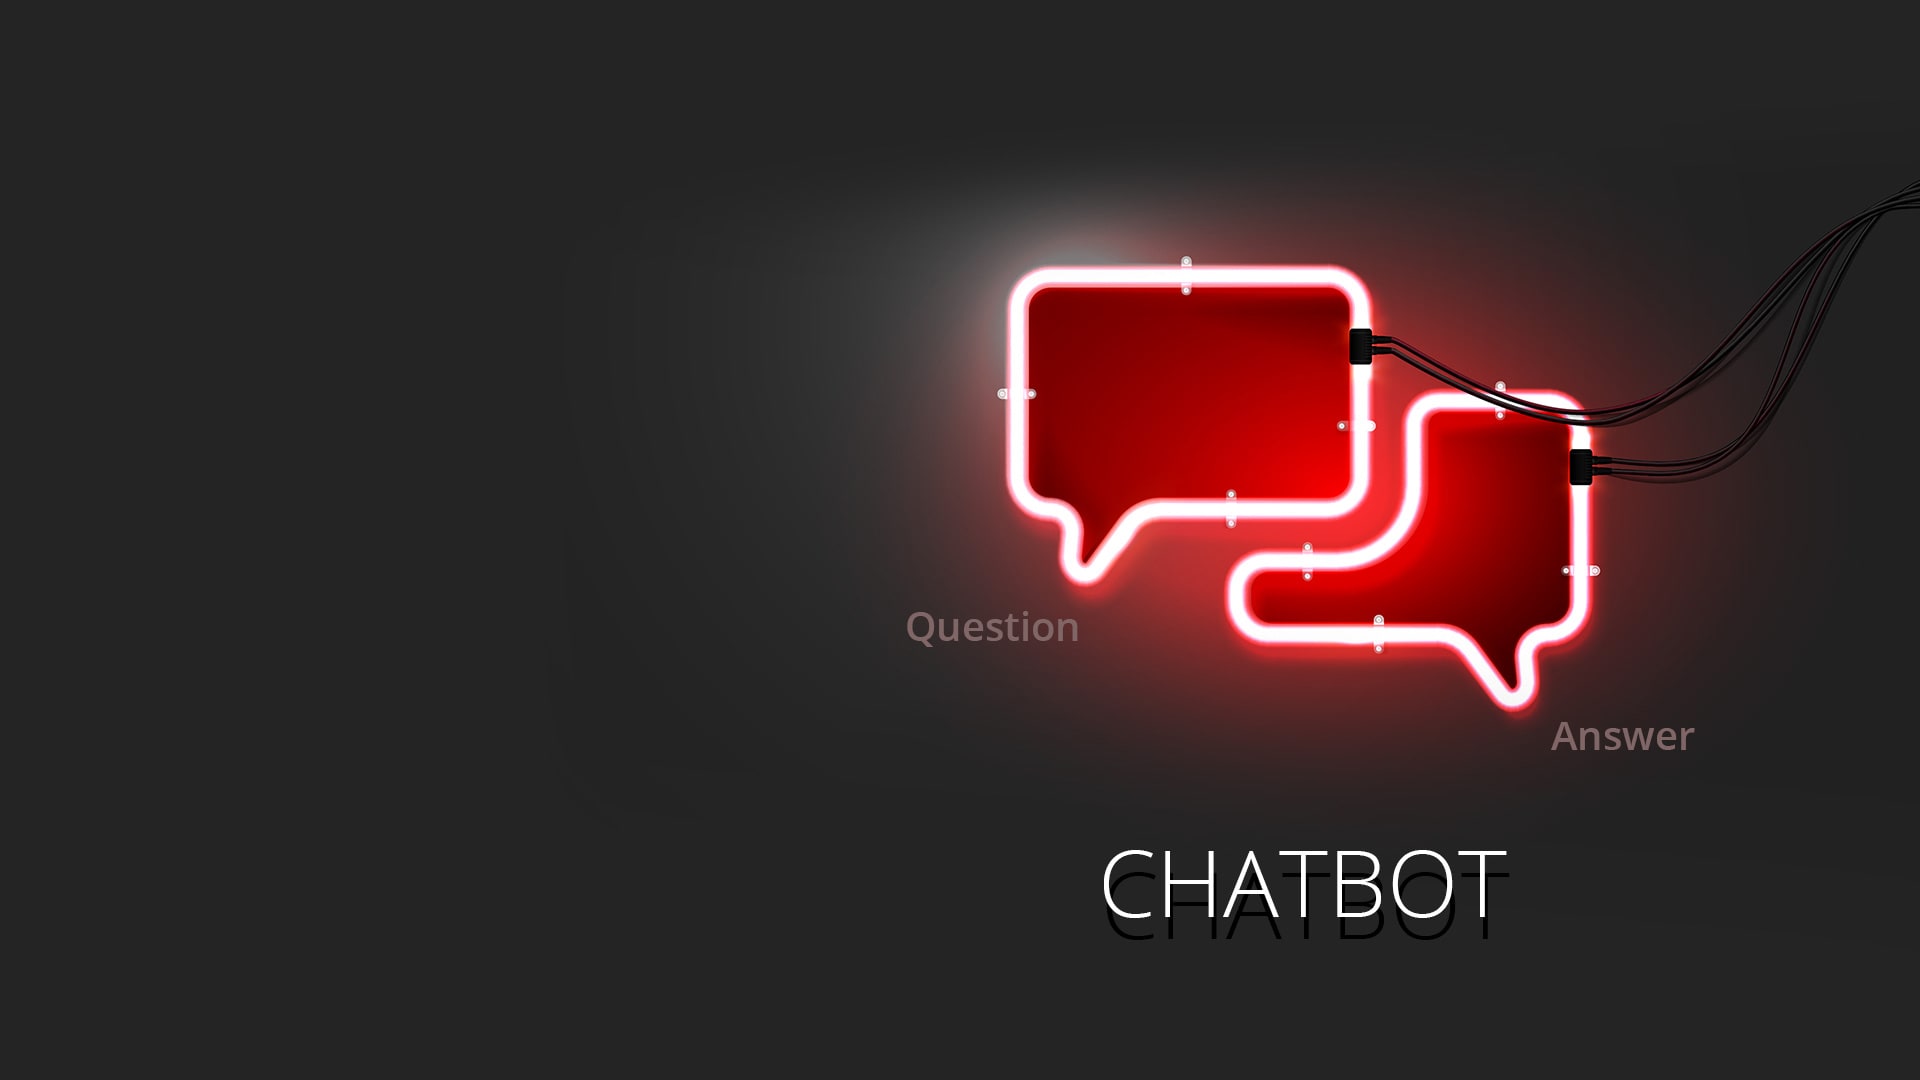 Enterprise AI Powered Chatbot. Grow Your Business With AI